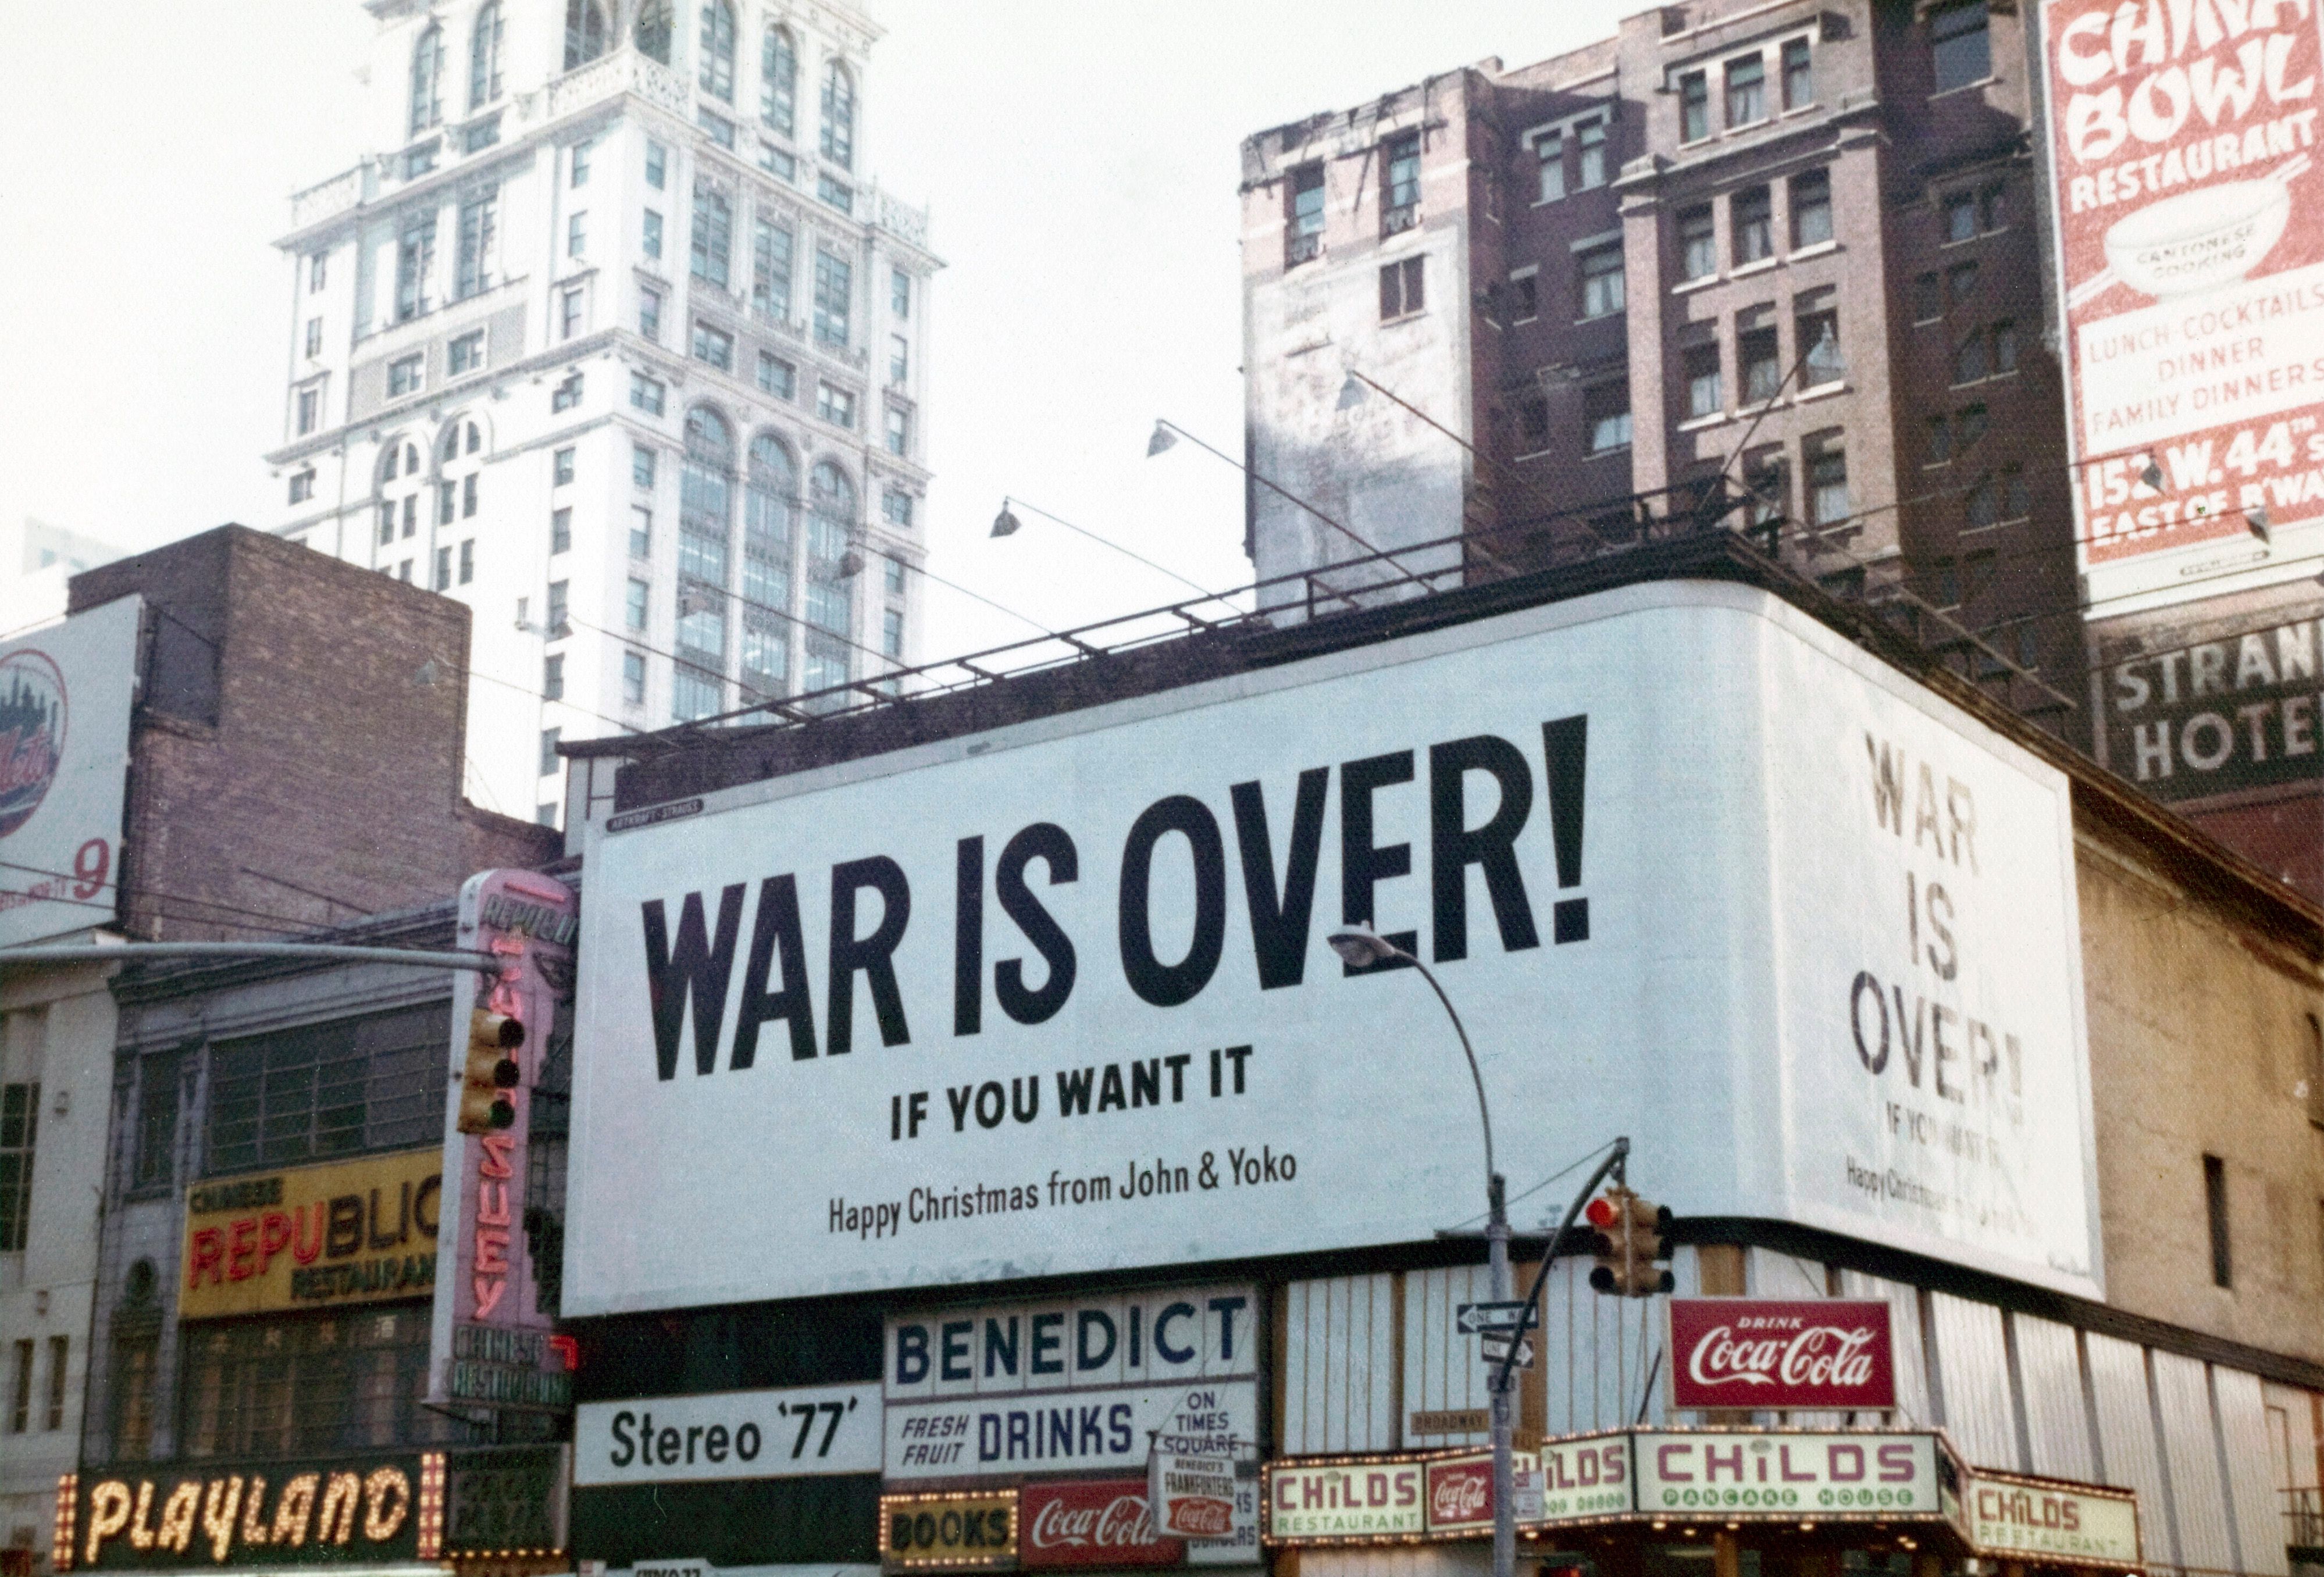 John Lennon and Yoko Ono’s “War is Over! If you want it” billboard campaign, Times Square, 1969